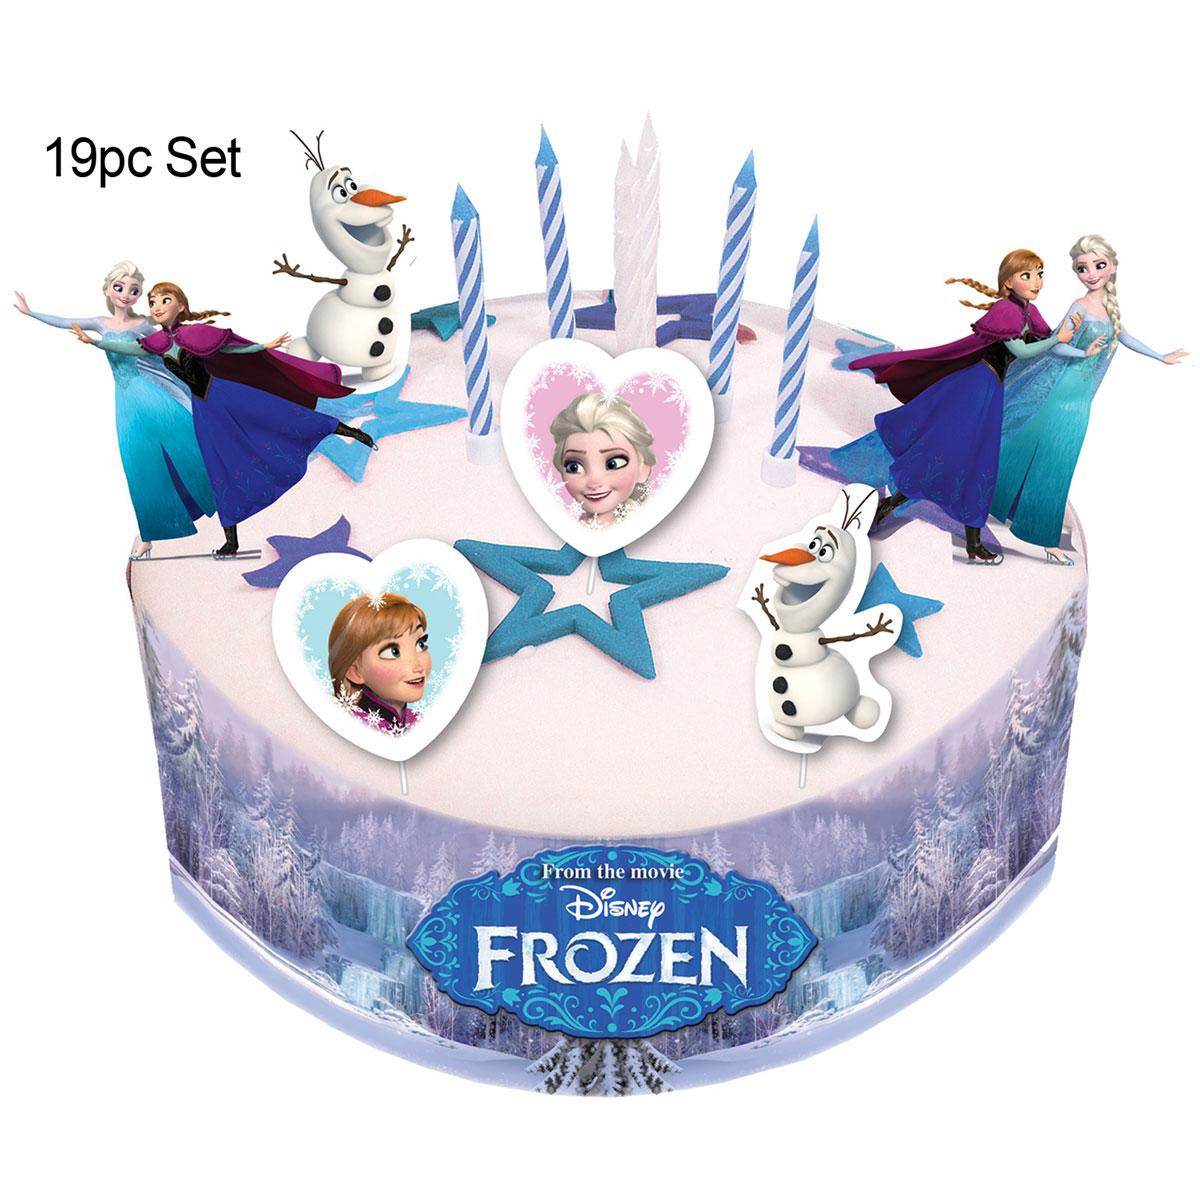 Frozen Cake Decorating Set - 19pcs by Amscan 999266 available here at Karnival Costumes online party shop